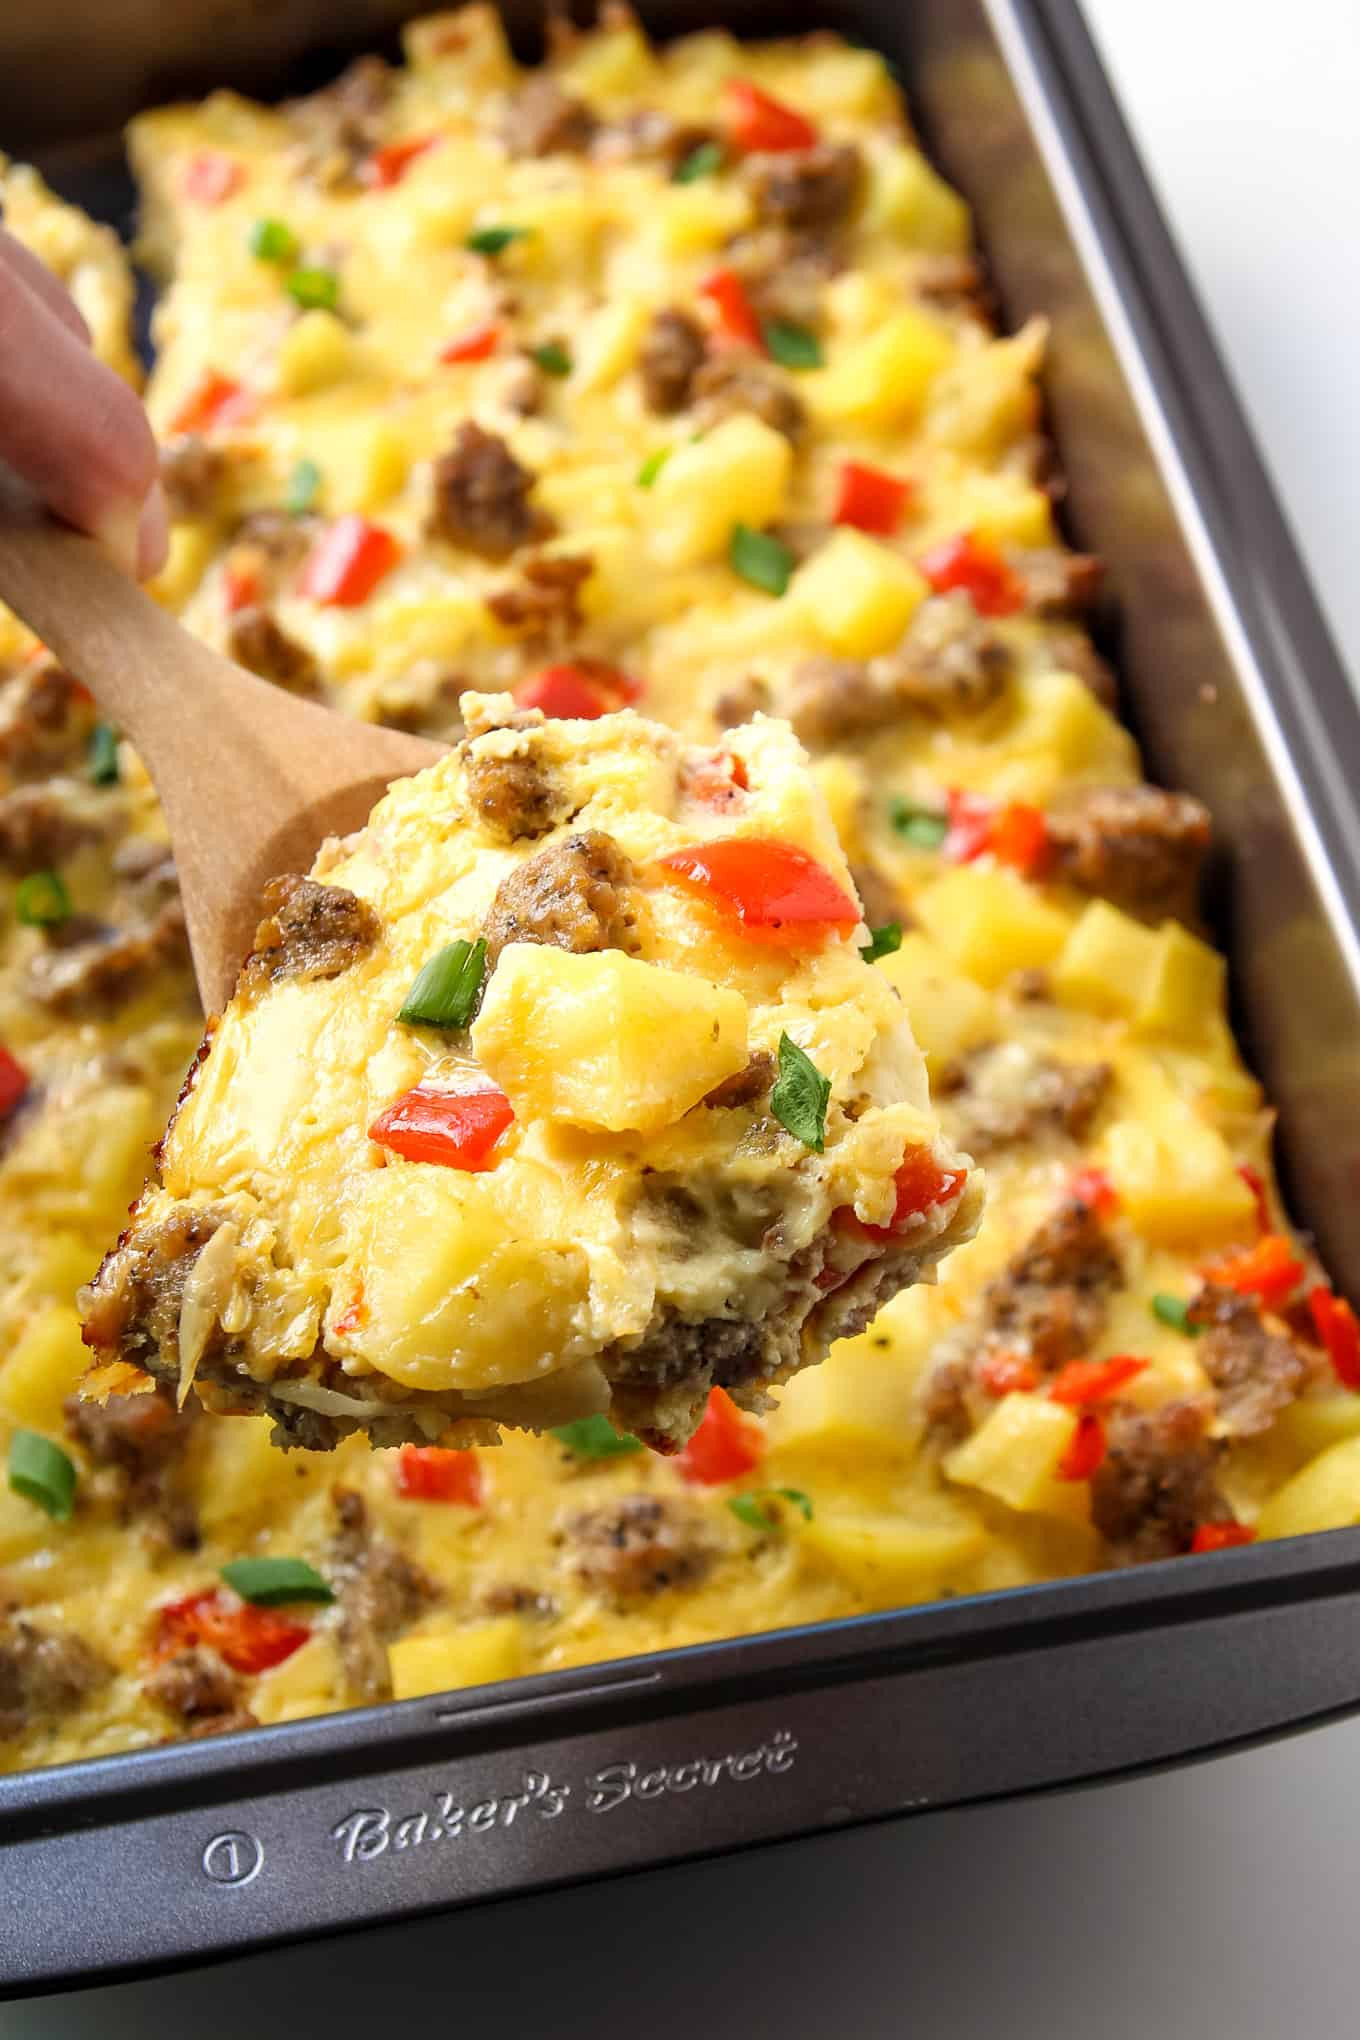 Eggs And Potato Breakfast
 Breakfast Casserole with Eggs Potatoes and Sausage